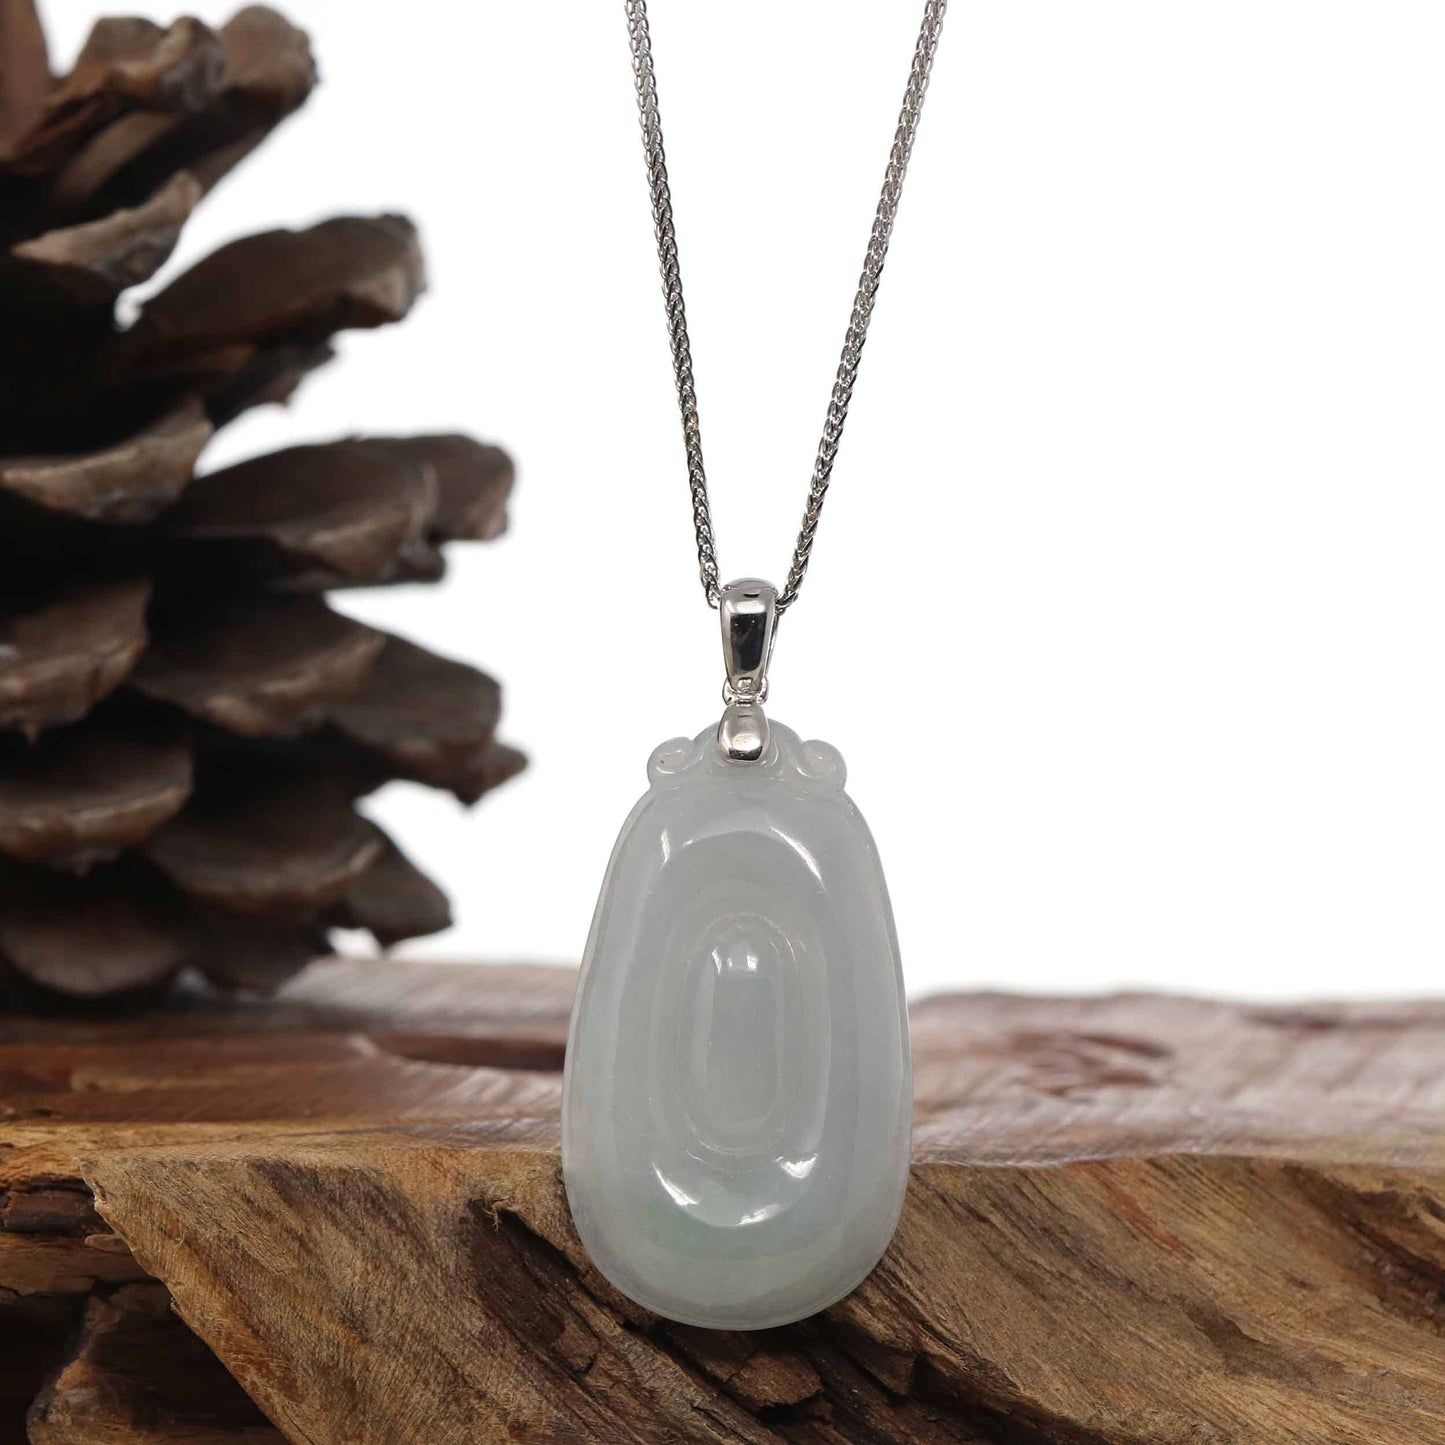 RealJade Co.® Jade Guanyin Pendant Necklace Copy of Natural Light Green Jadeite Jade Fu Bei Pendant Necklace With Sterling Silver Bail